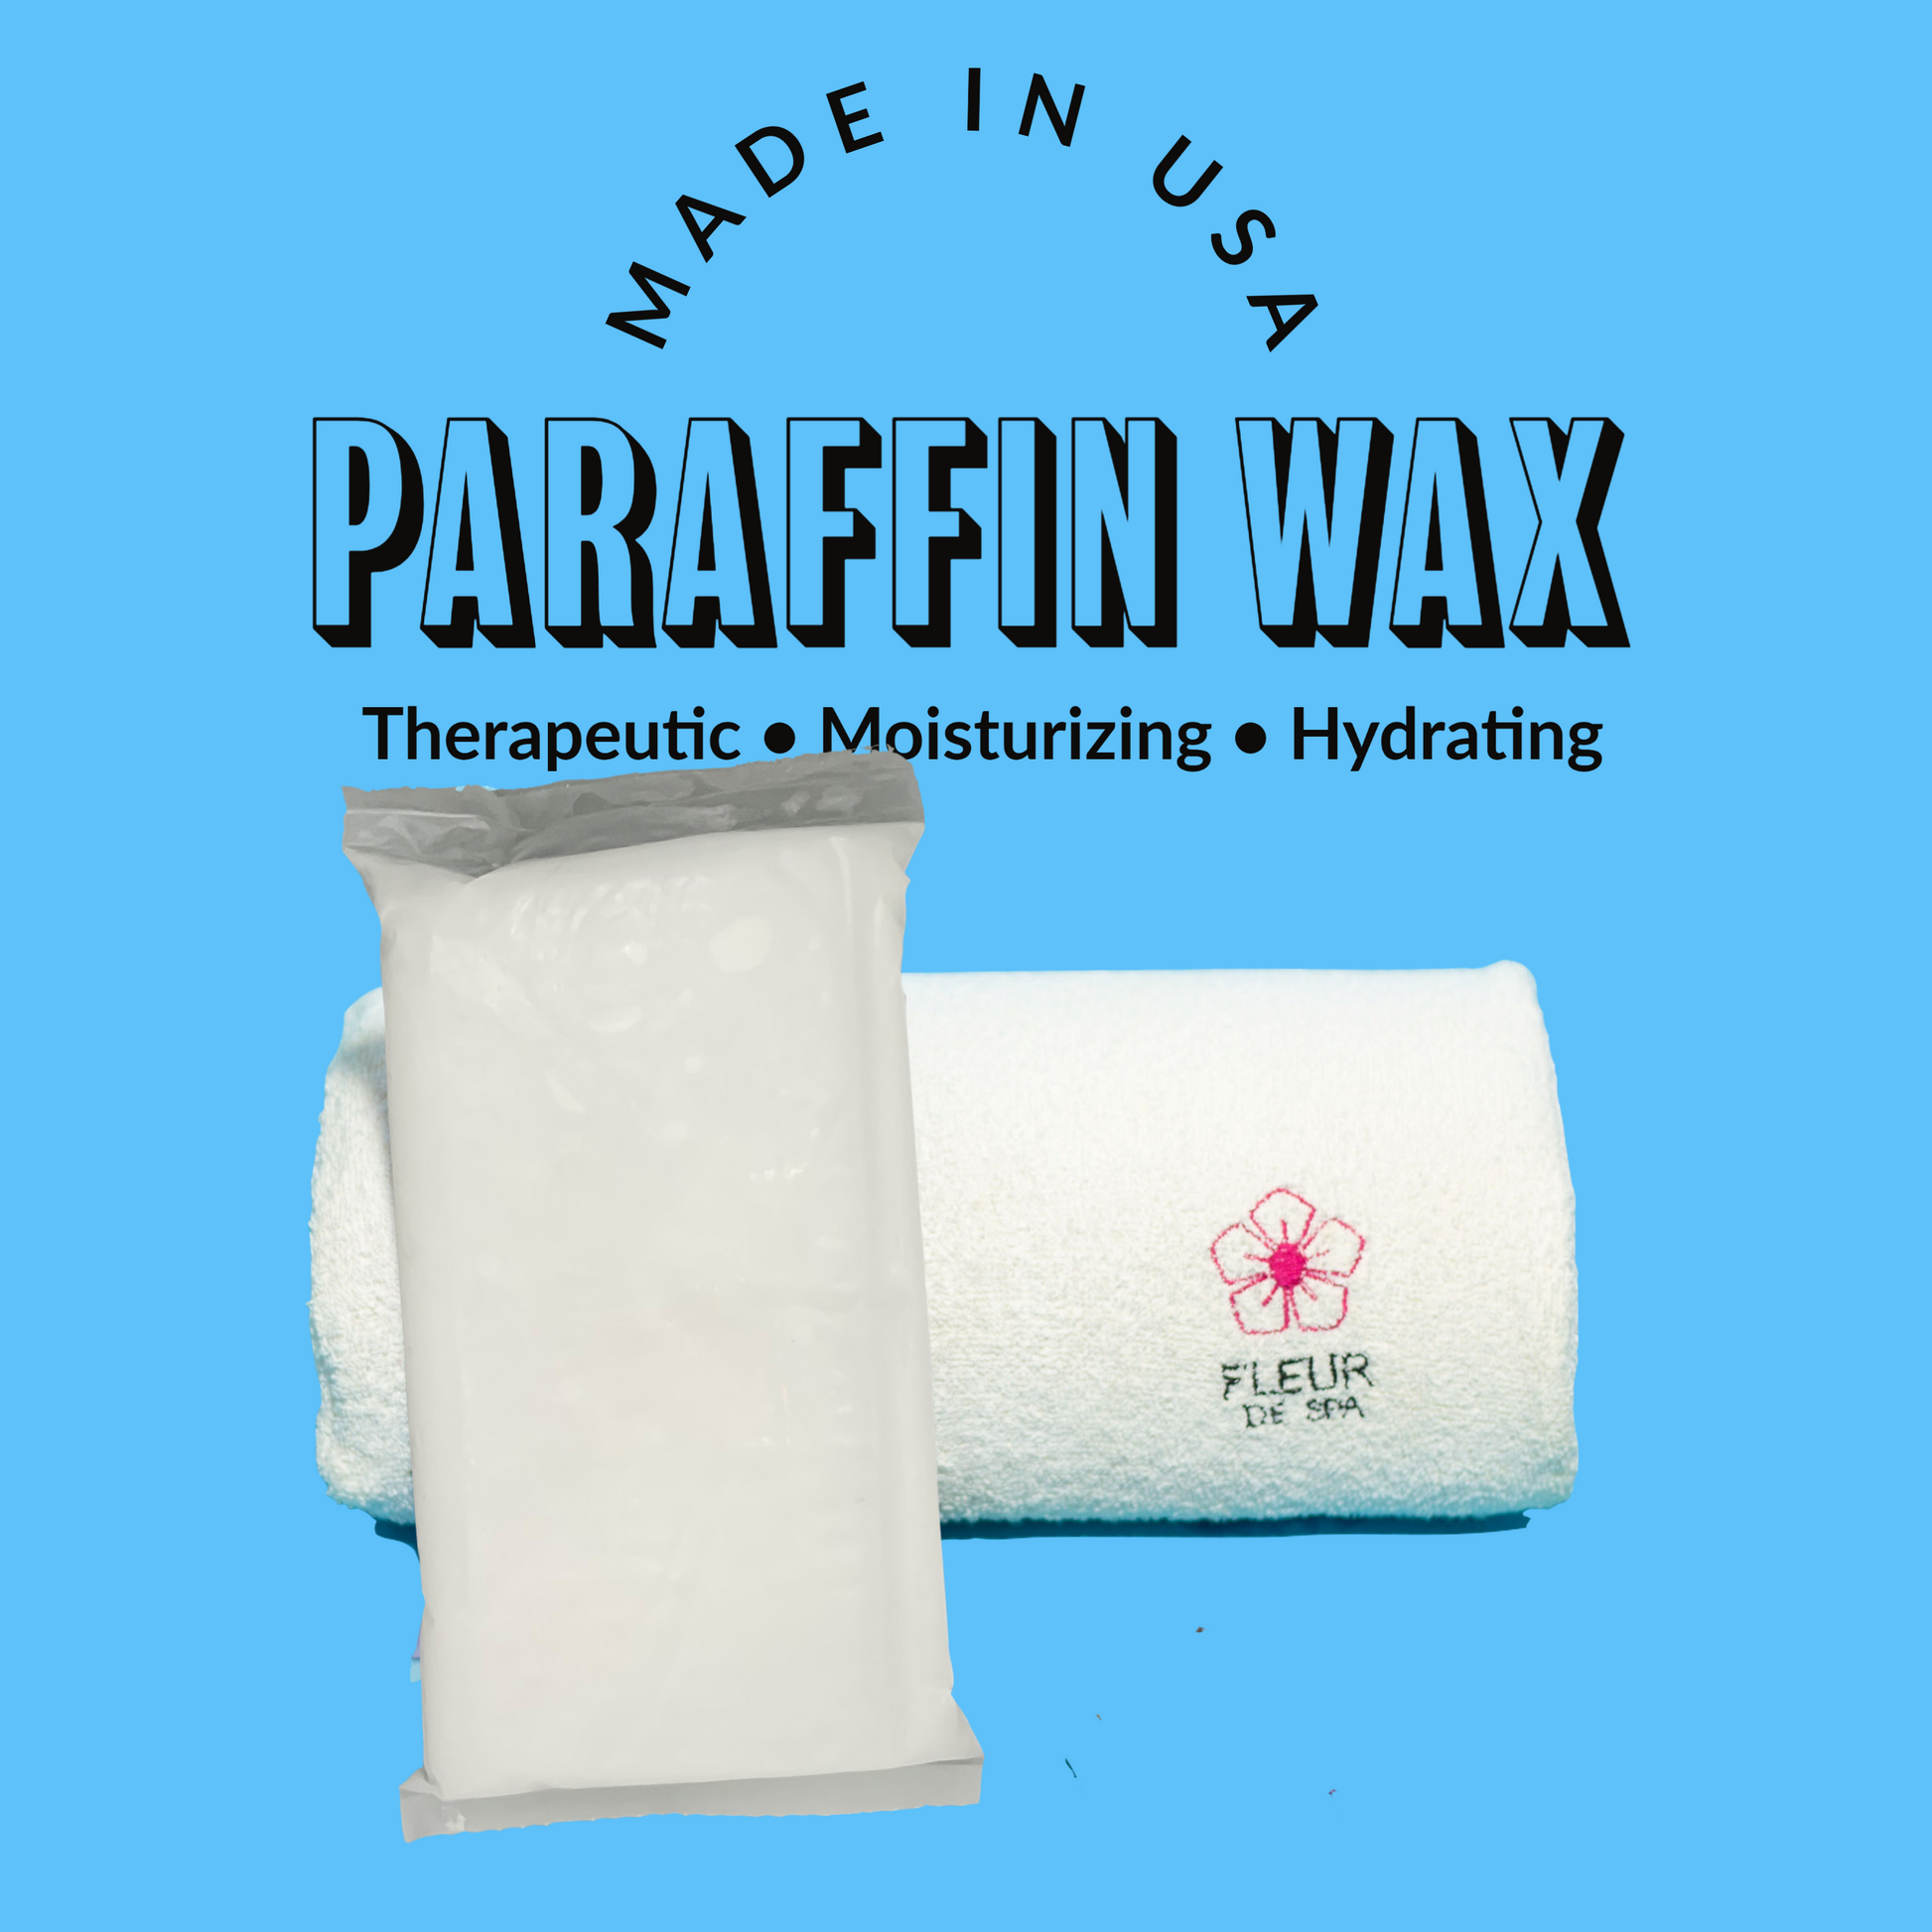 Paraffin Wax Refills by Creation: Bulk 6 lbs of Lavender Paraffin Wax  Block, Use in Paraffin Wax Machine for hand and feet, Paraffin Wax Bath,  Relieve Arthritis Pain Stiff Muscles Deeply Hydrates